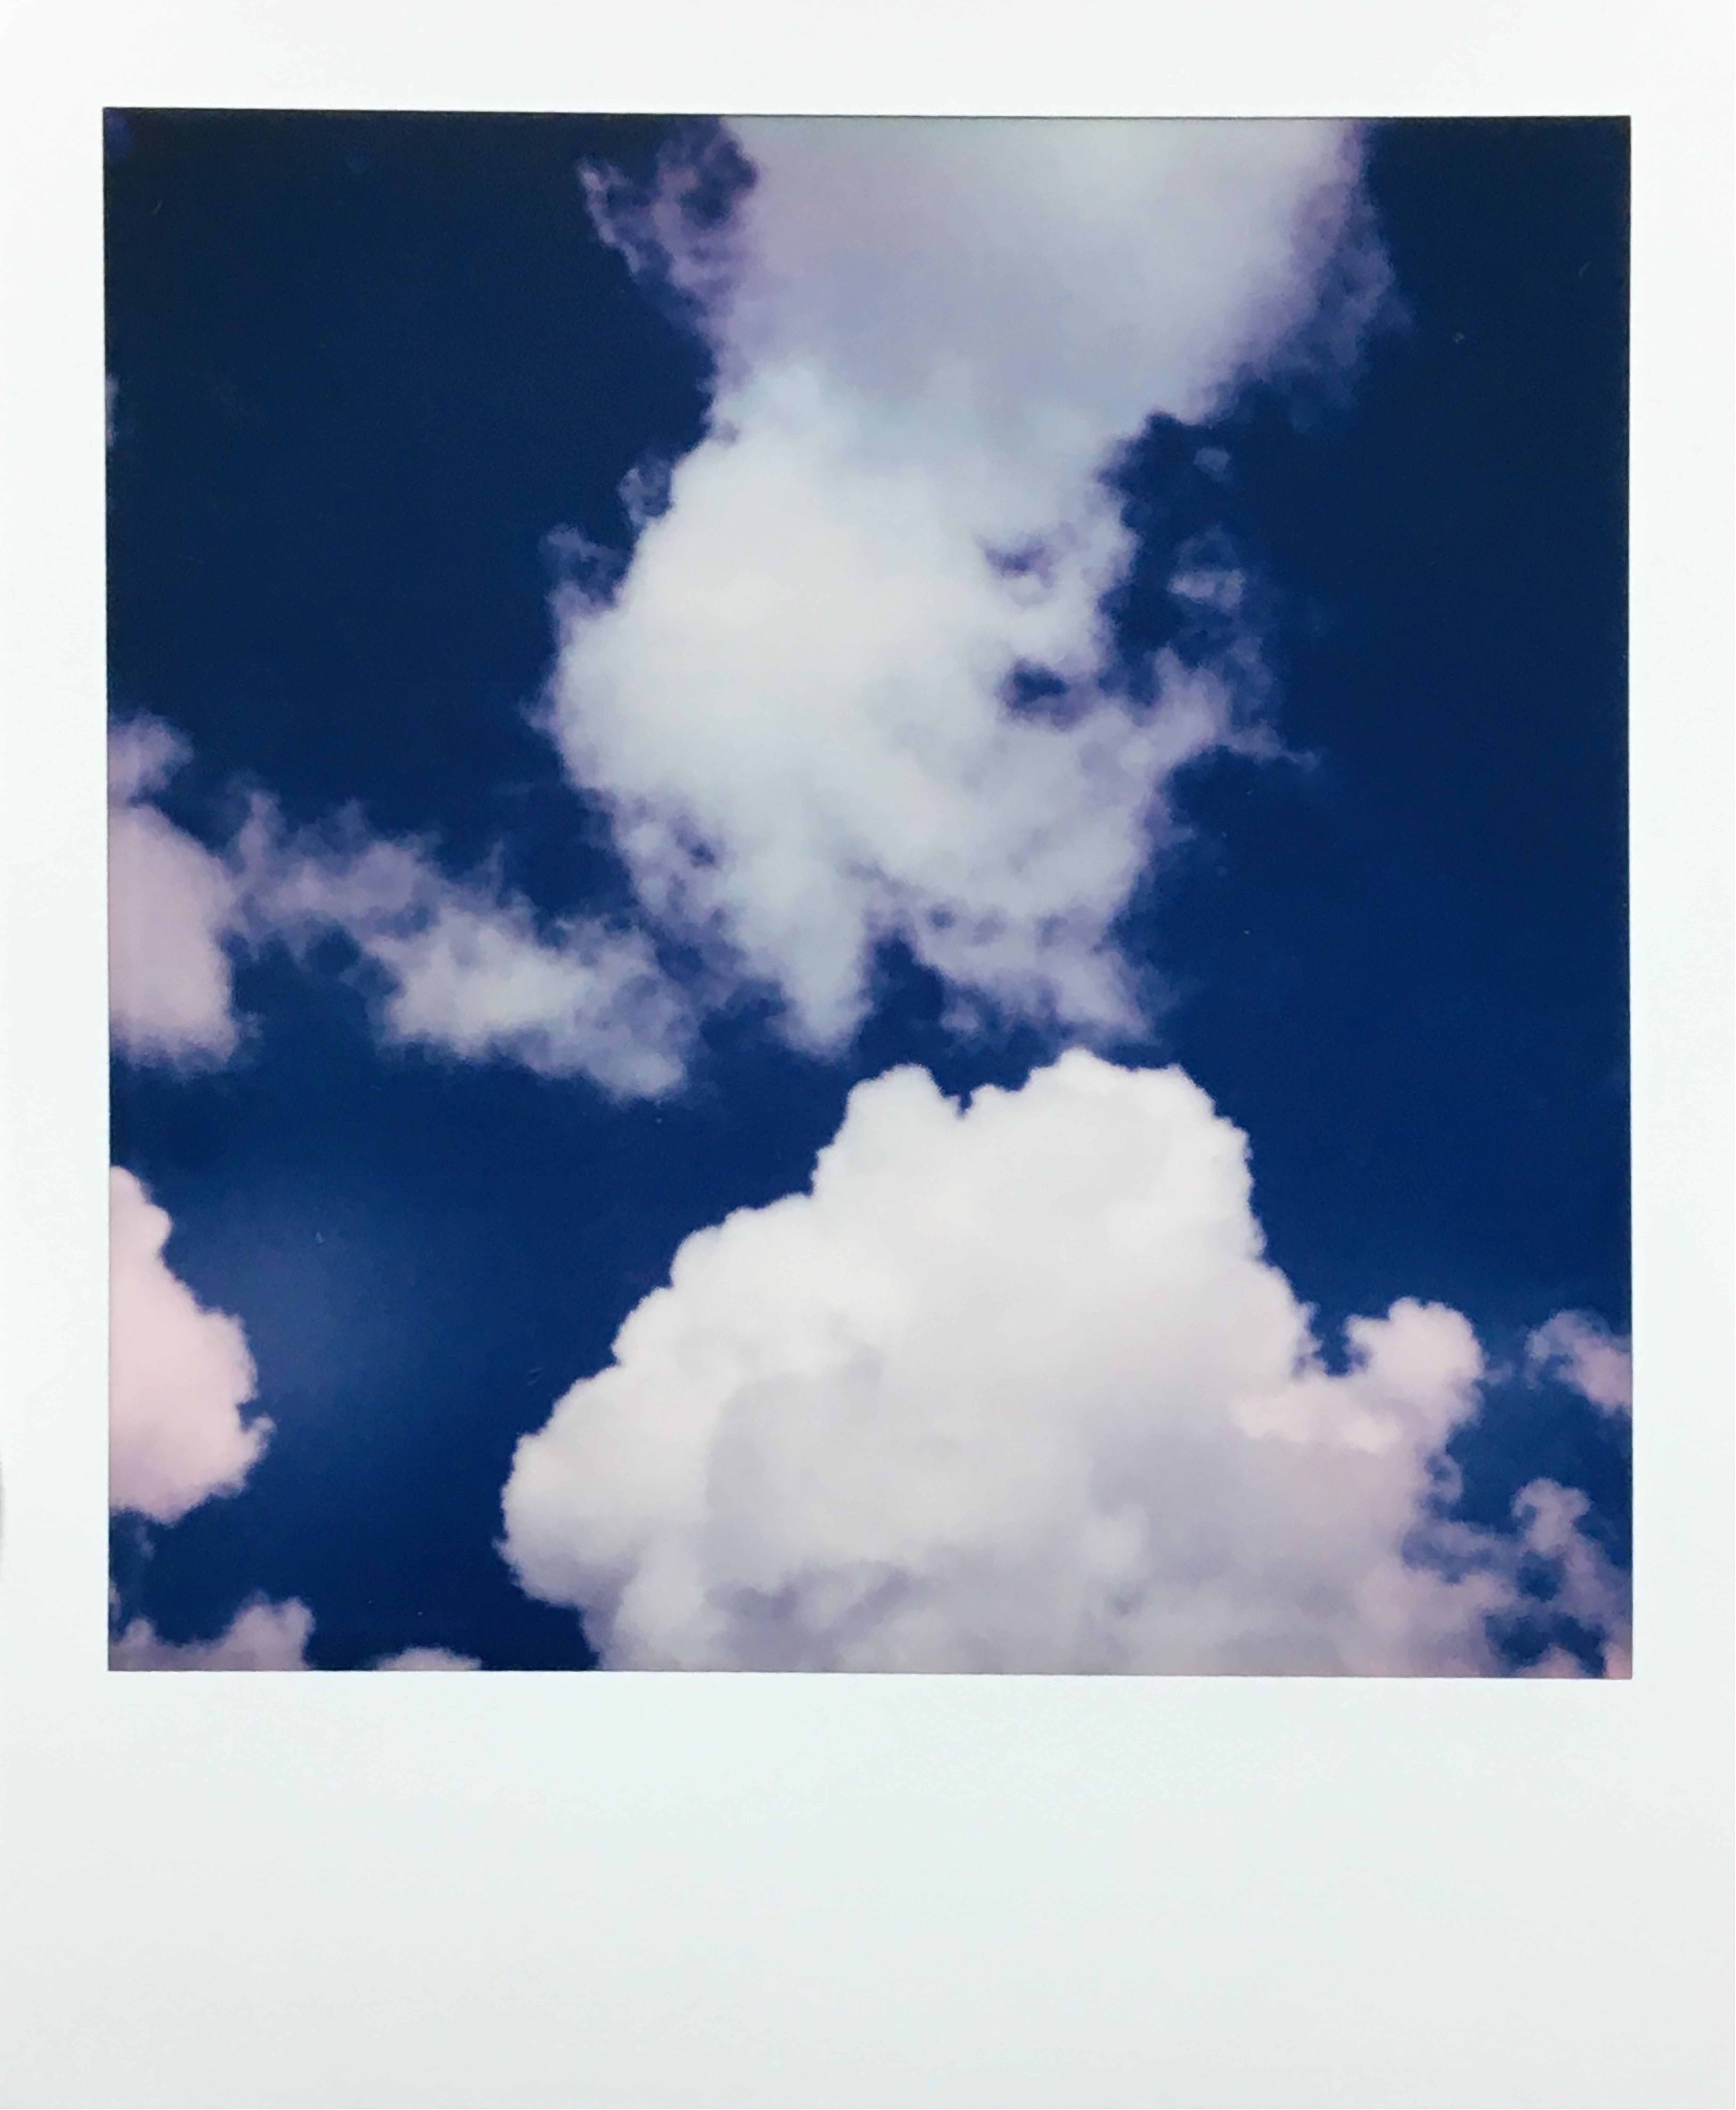 A picture of clouds and blue sky - Polaroid